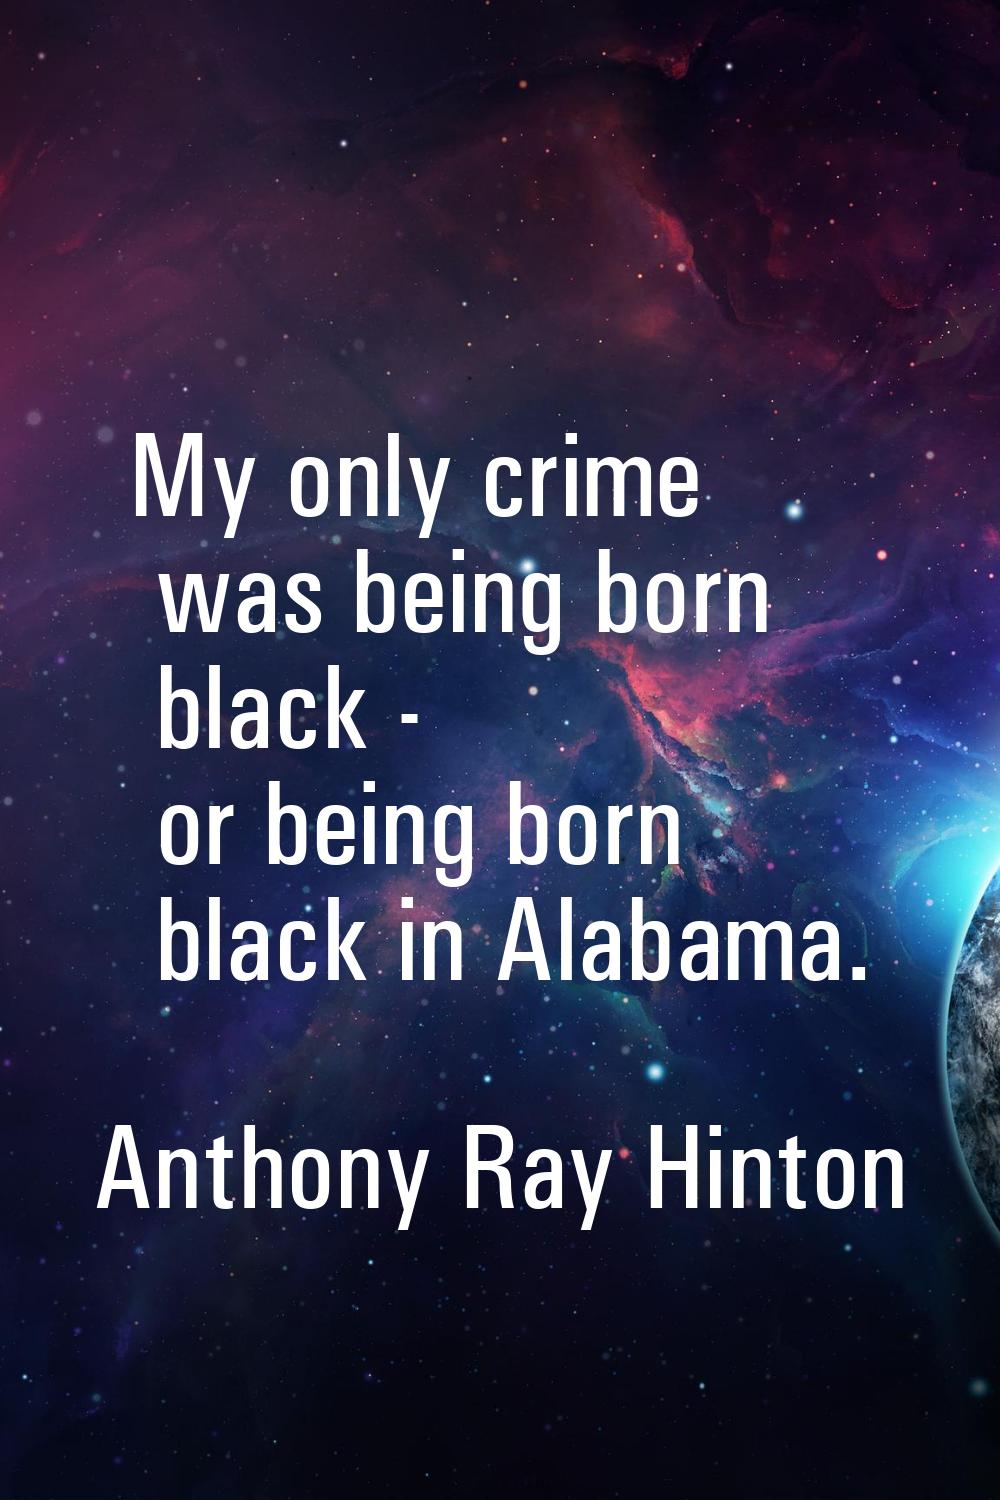 My only crime was being born black - or being born black in Alabama.